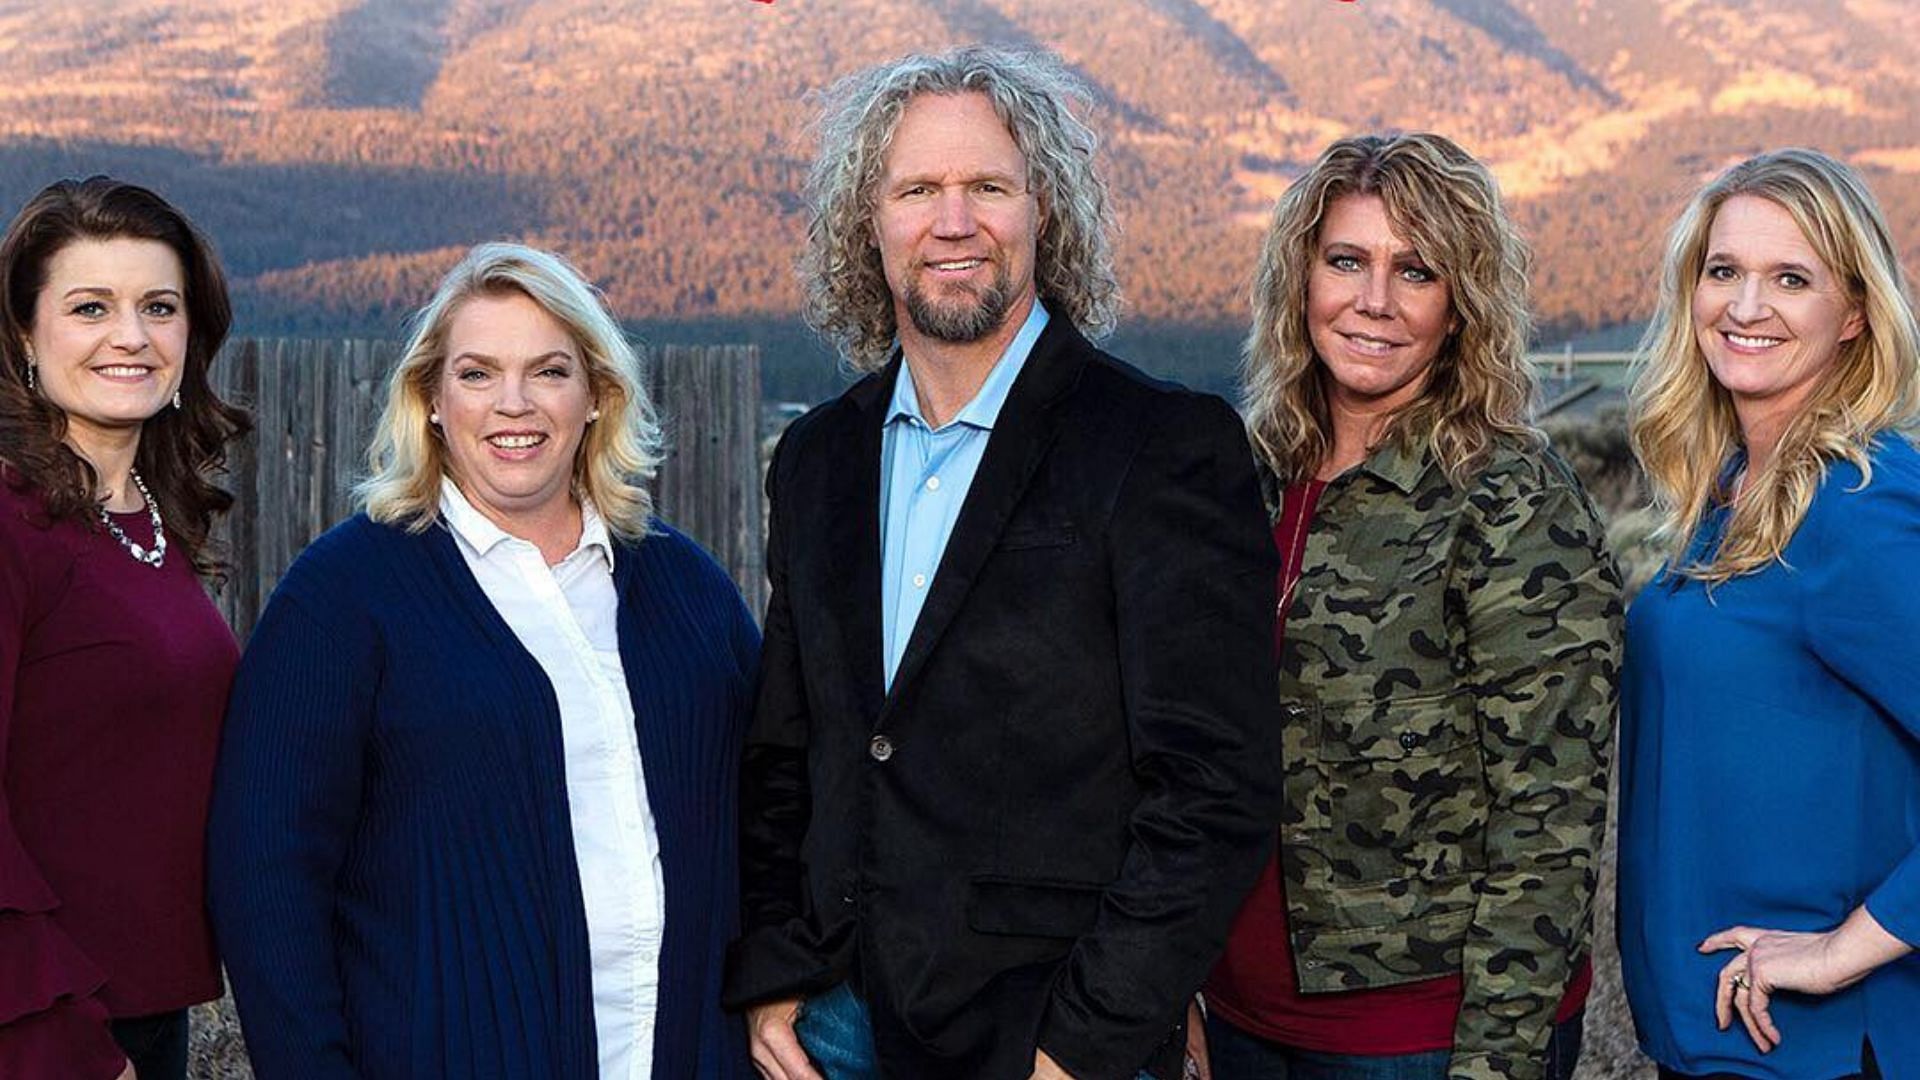 Kody Brown and Sister Wives (Image via Instagram/@robyn_browns_nest)